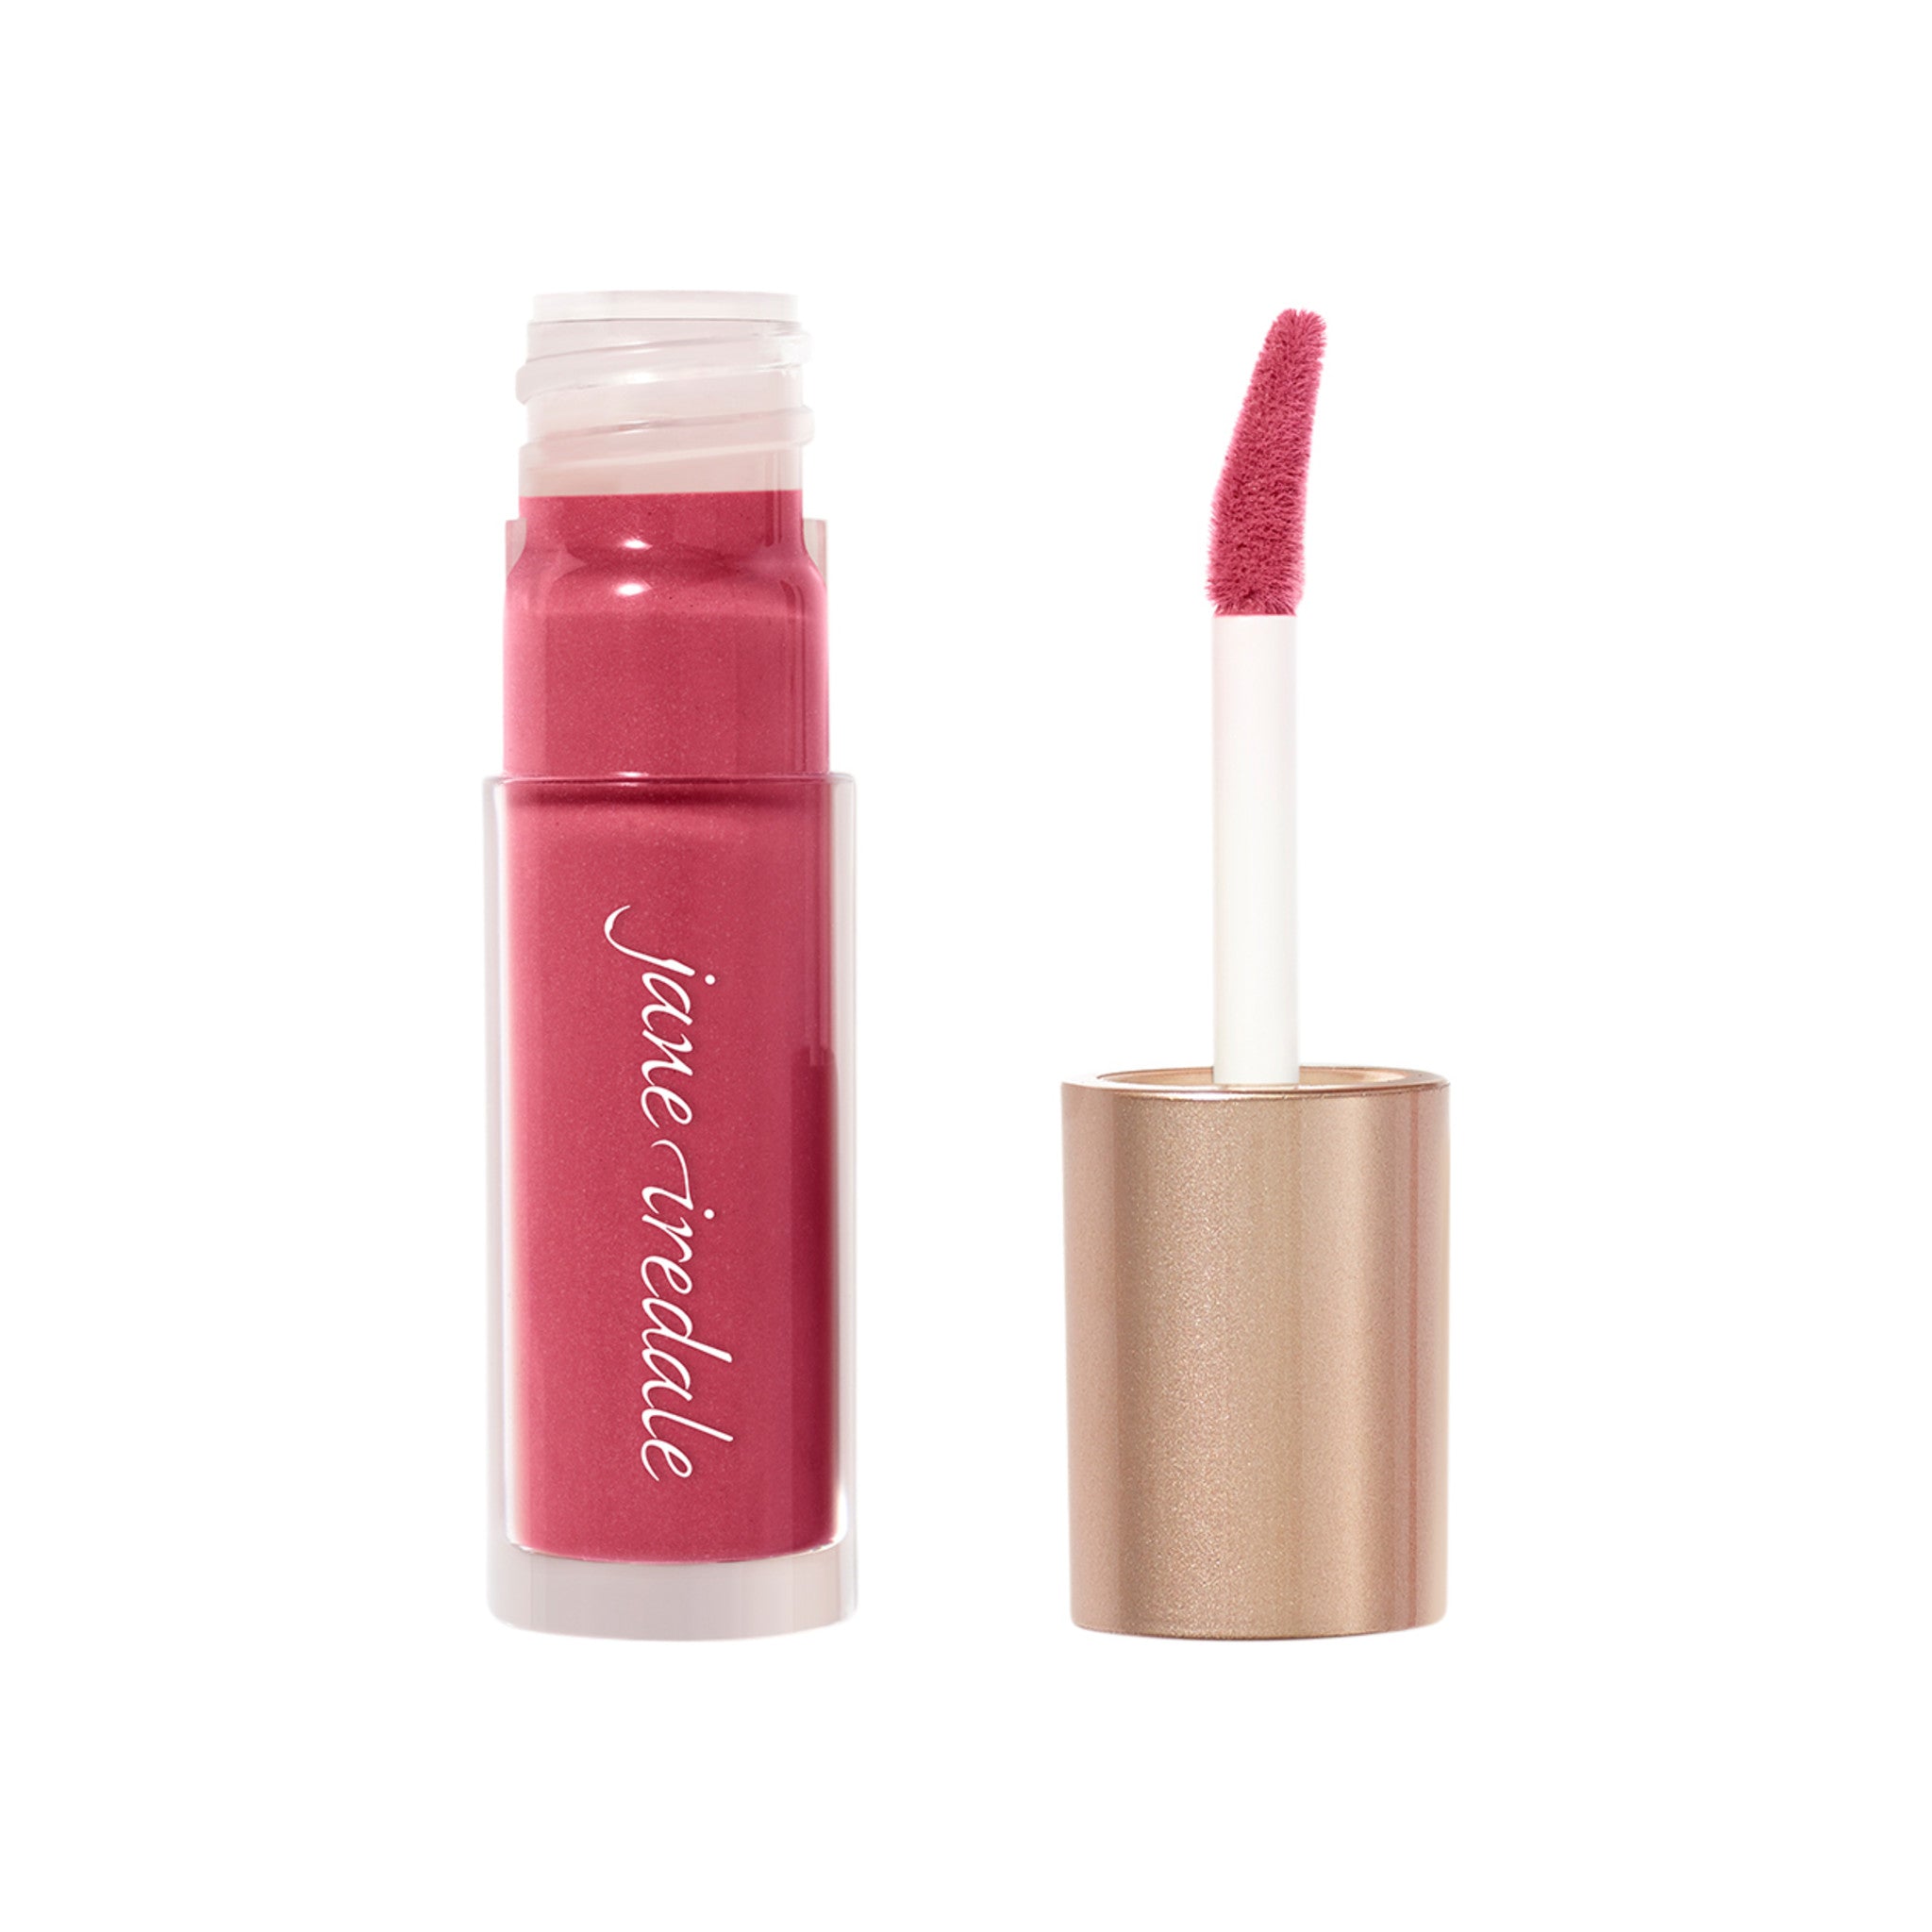 Jane Iredale Beyond Matte Lip Stain Color/Shade variant: Obsession main image. This product is in the color red